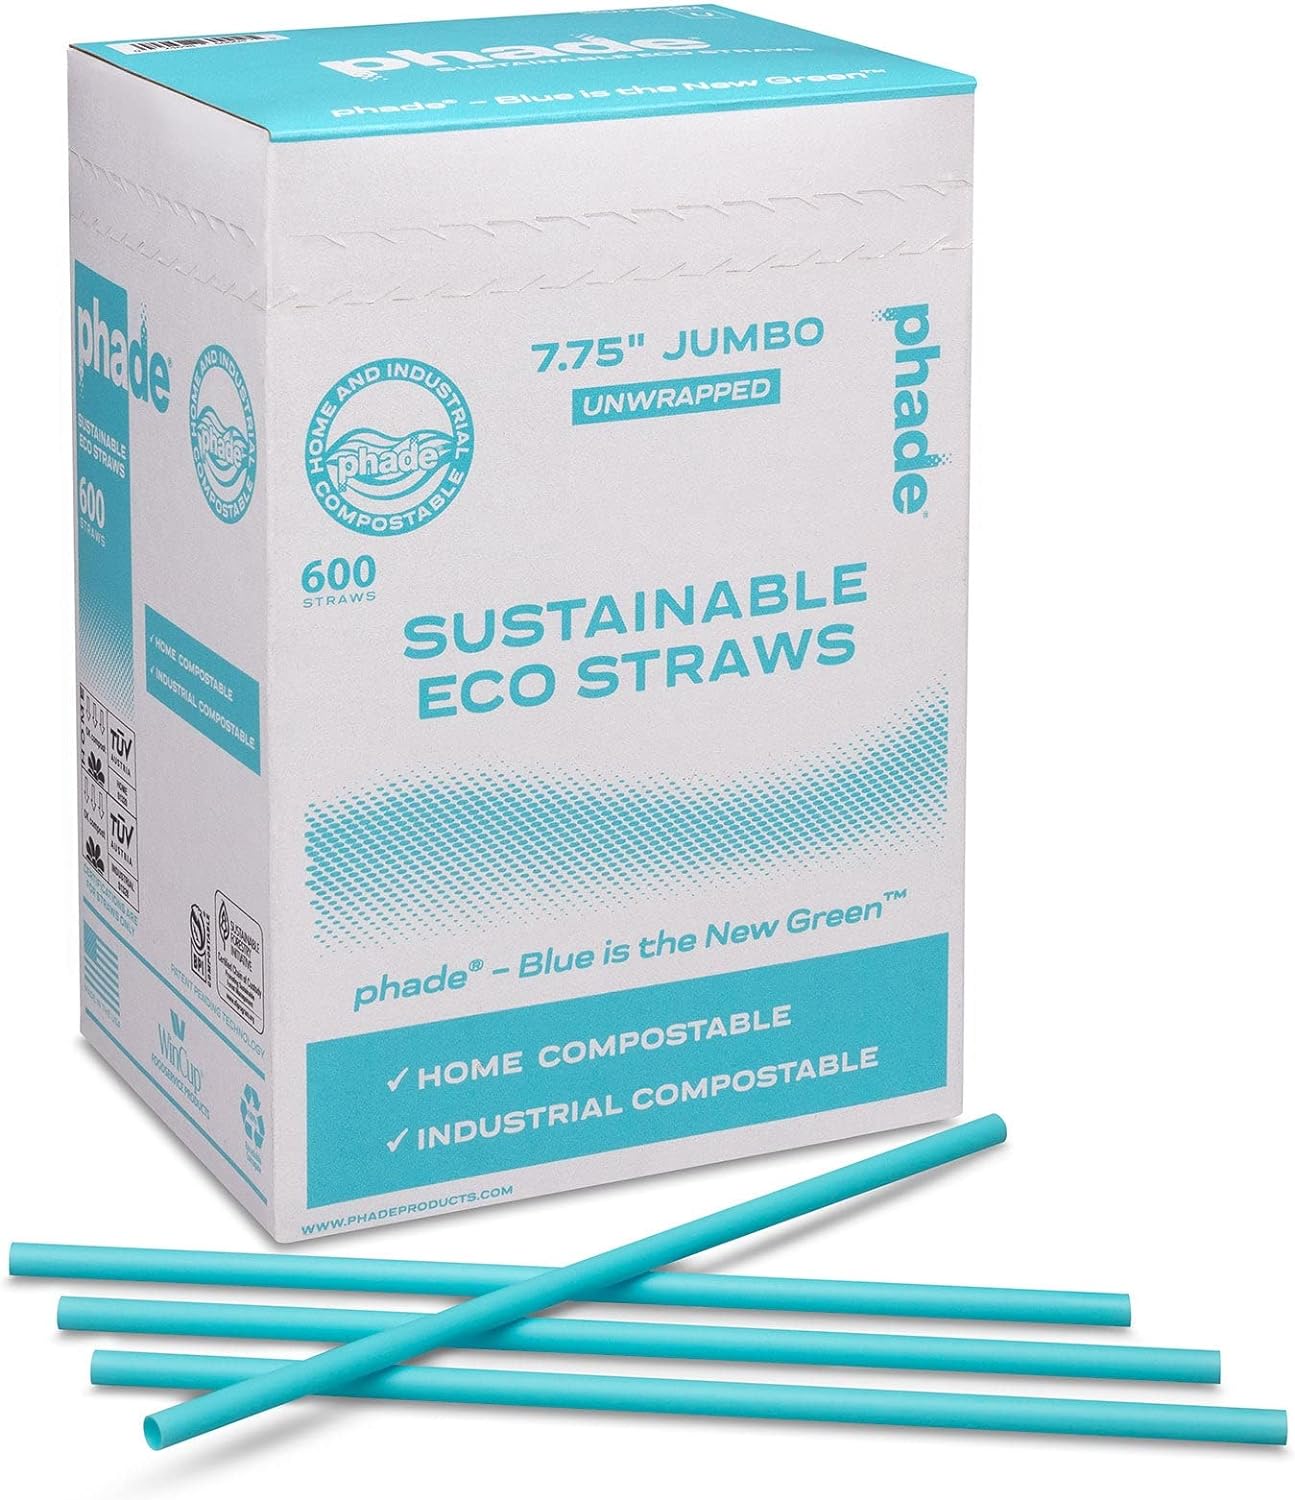 eco friendly 775 jumbo drinking straws un wrapped 600 count sustainable marine biodegradable compostable 1 pack